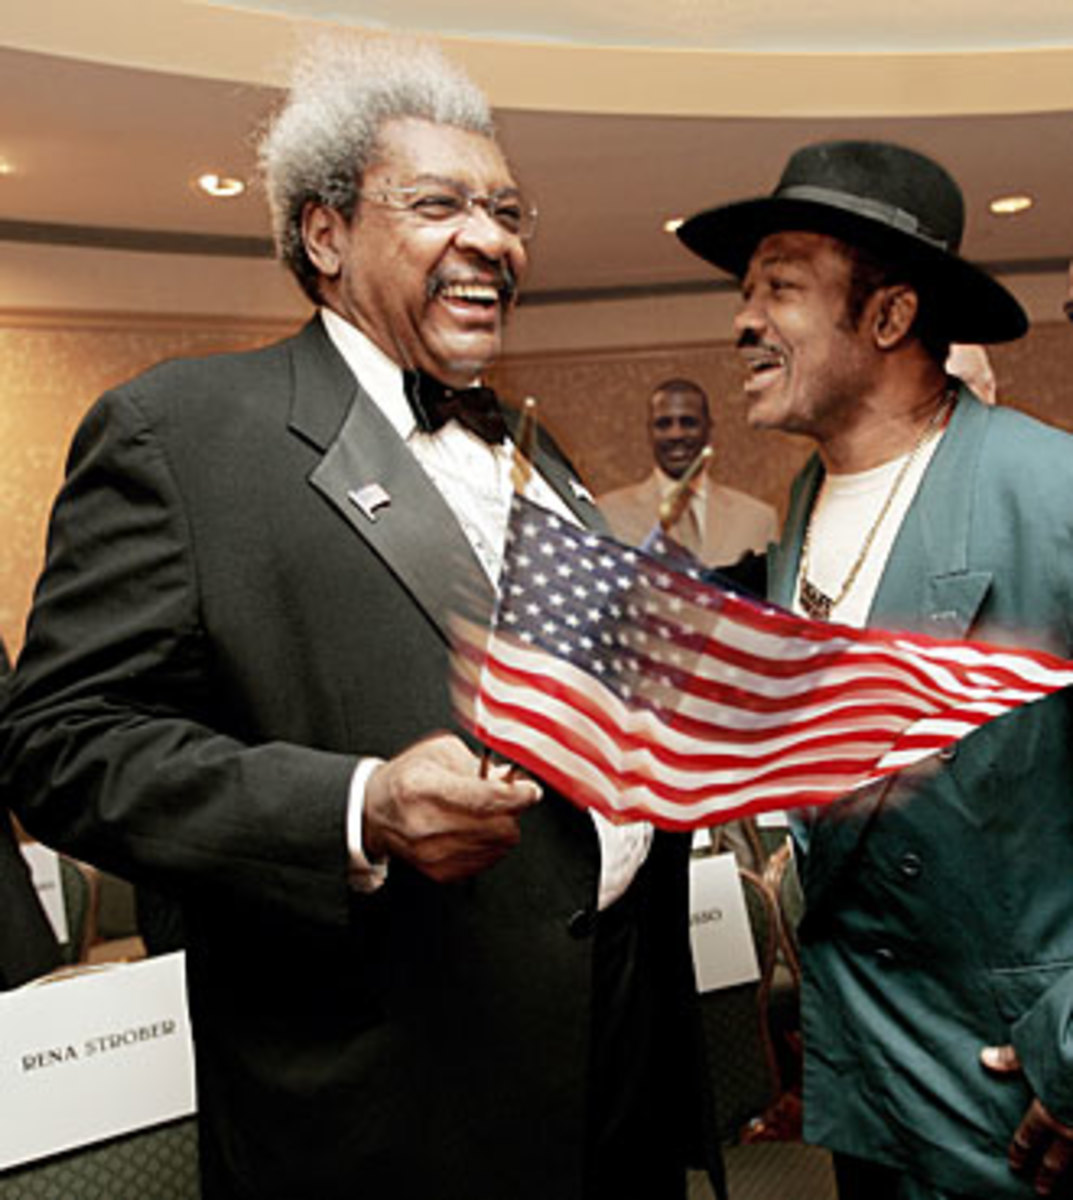 Don King once promoted Joe Frazier's fights, but now it was the ex-champ's turn to get some punches in.